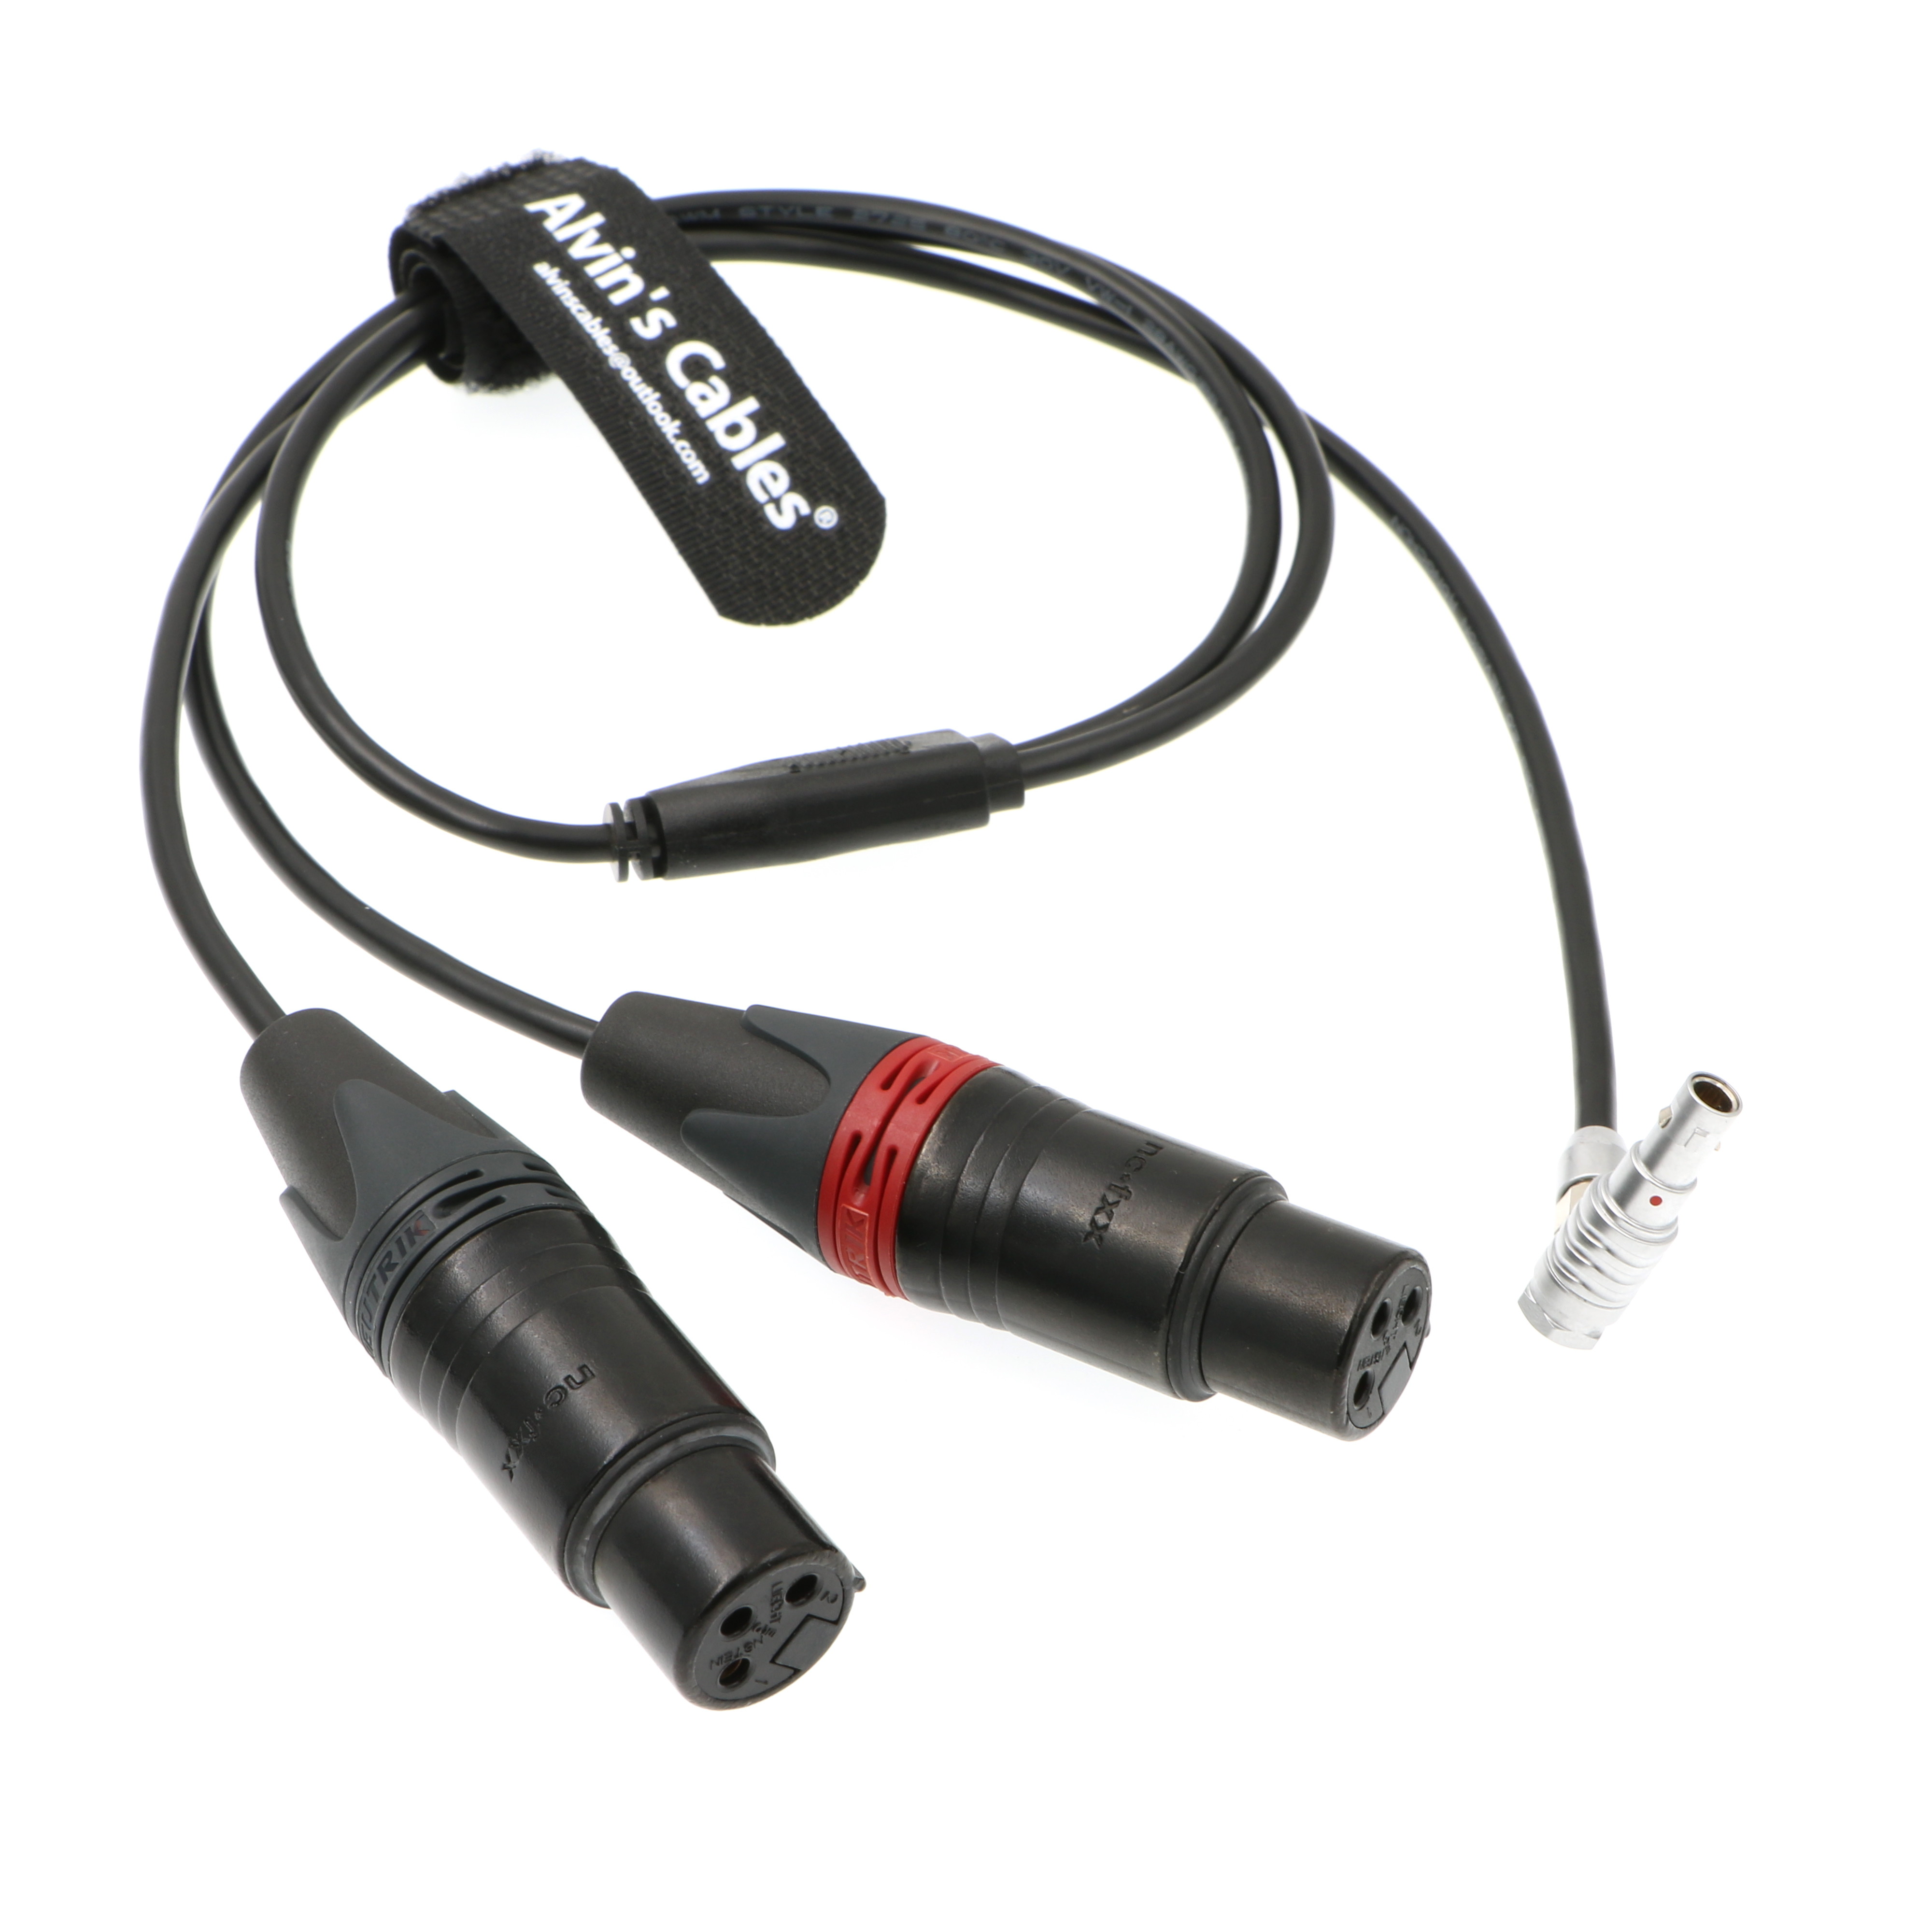 Alvin's Cables Two XLR 3 Pin Female to 5 Pin Male Right Angle Audio